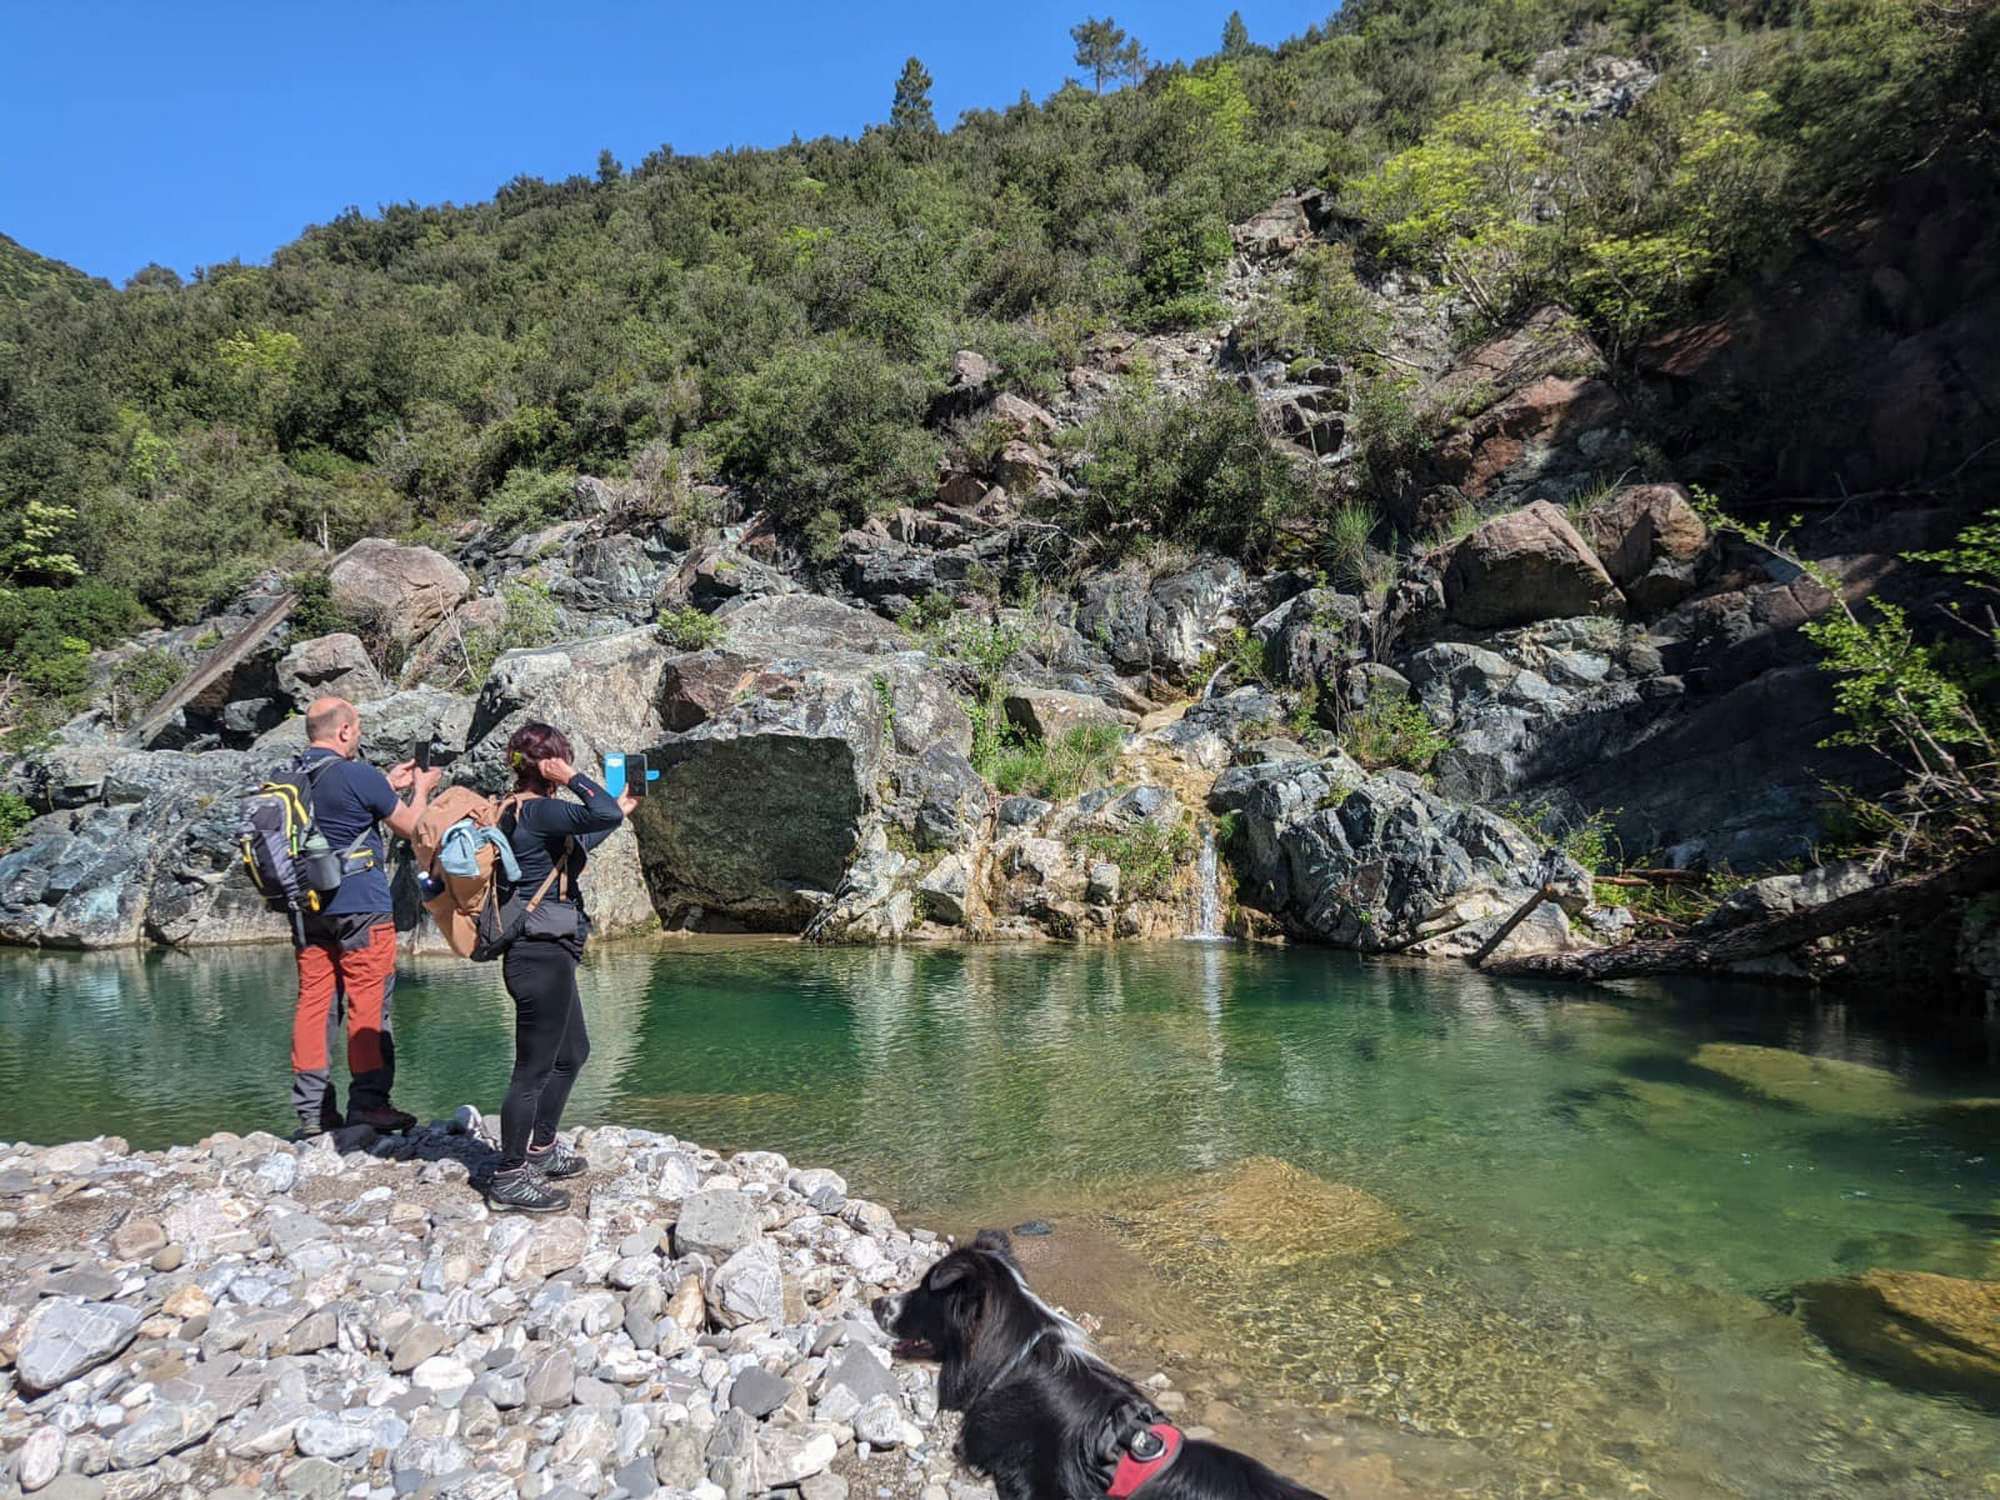 7 km trekking to the Diaterna Pools, in the heart of the Apennines